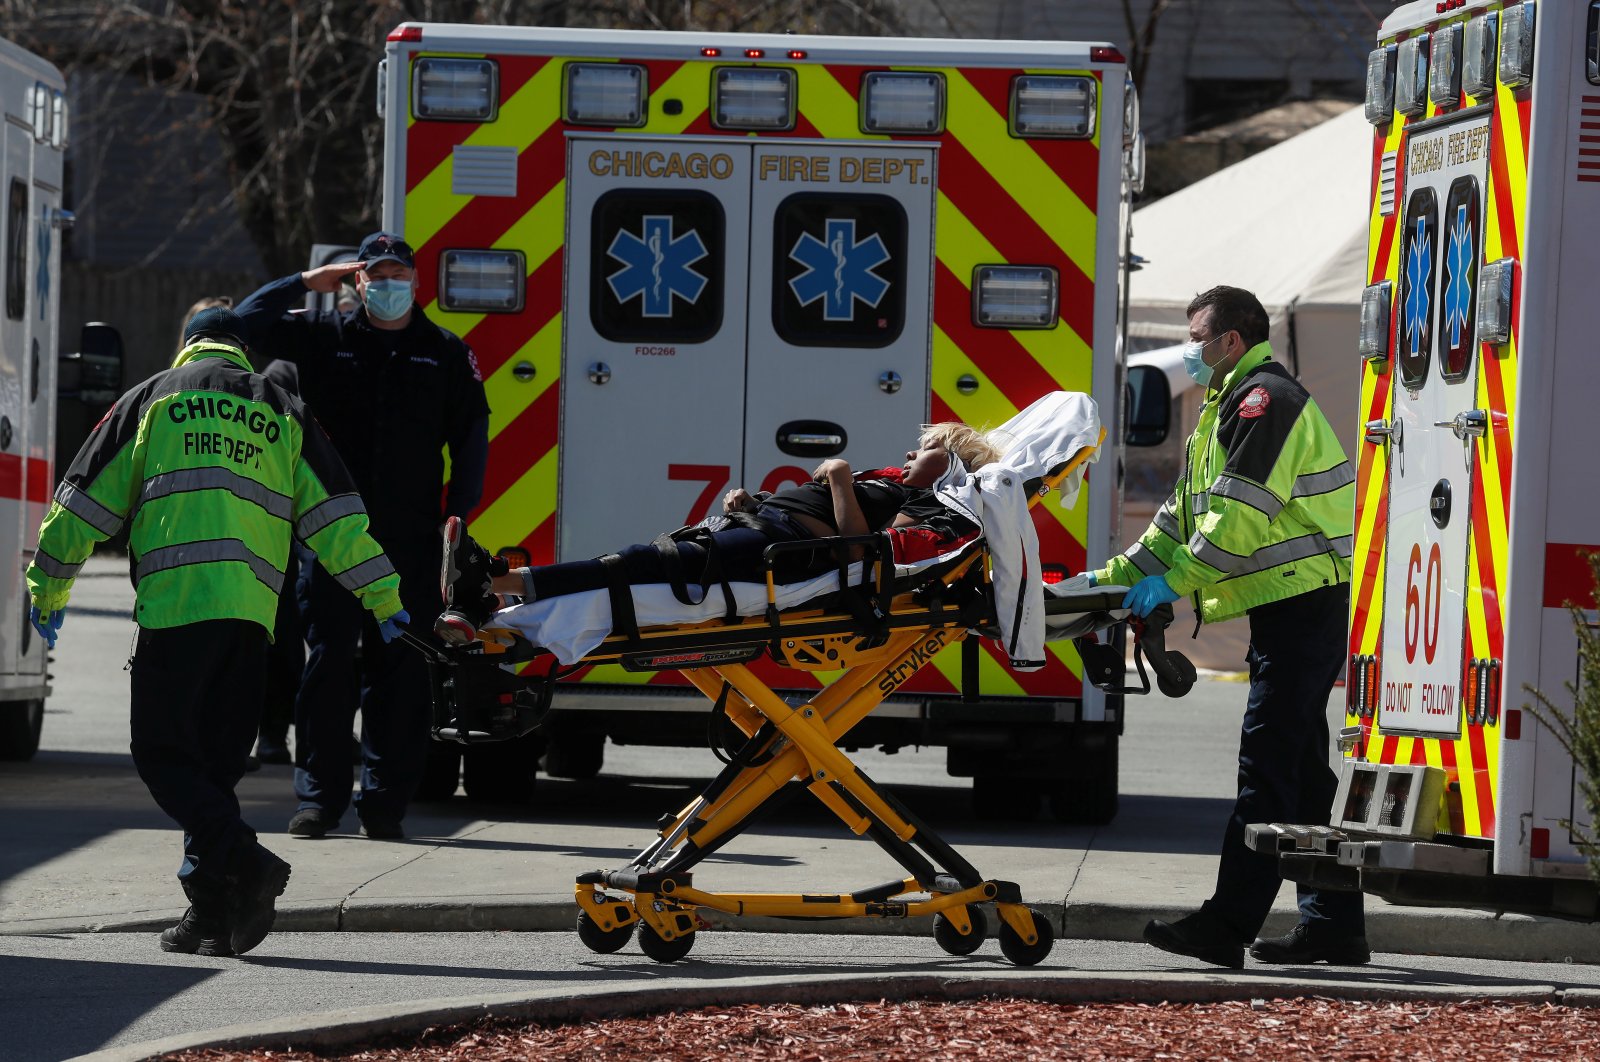 A woman is taken from a Chicago Fire Department ambulance into the emergency room at Roseland Community Hospital, as the spread of the coronavirus disease (COVID-19) continues, in the South Side of Chicago, Illinois, U.S., April 21, 2020. (Reuters Photo)